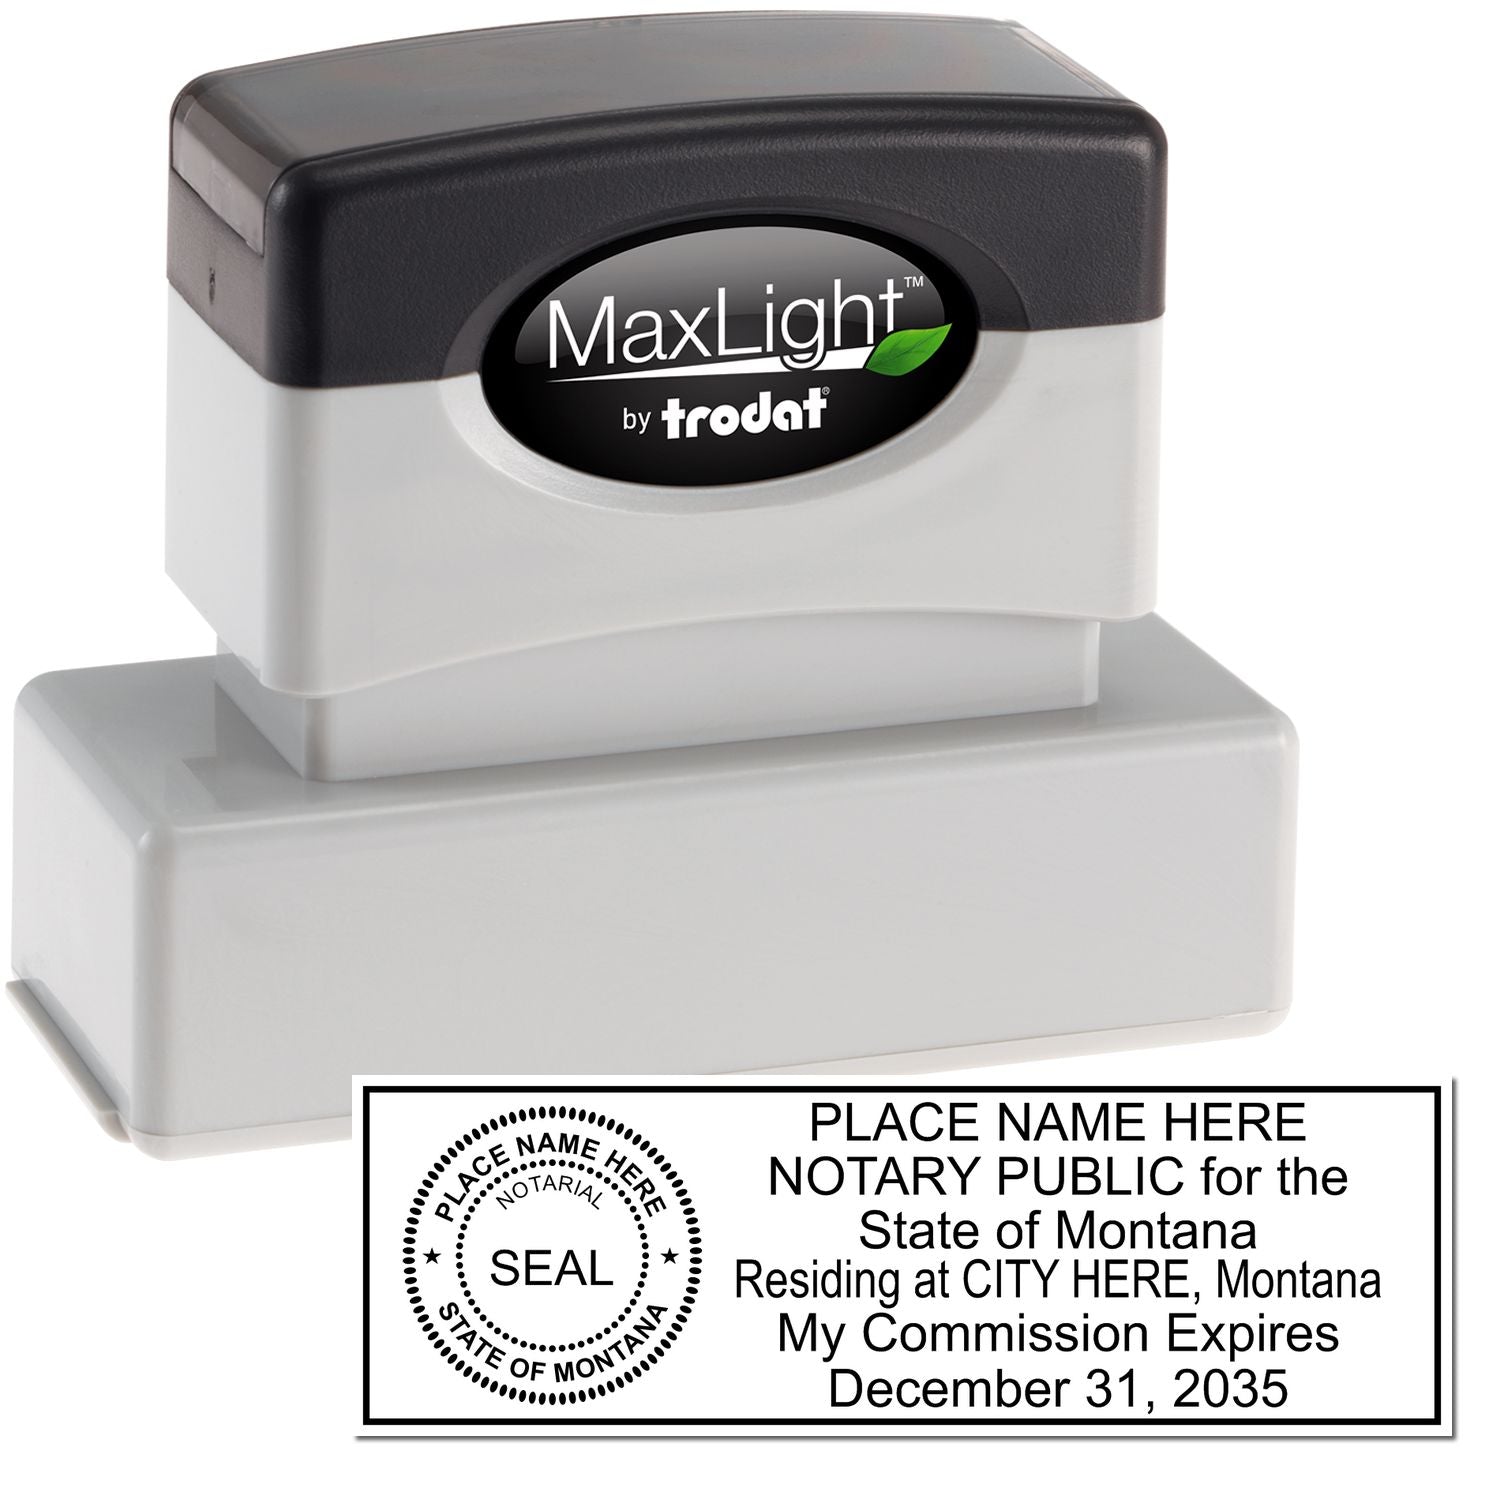 The main image for the MaxLight Premium Pre-Inked Montana State Seal Notarial Stamp depicting a sample of the imprint and electronic files